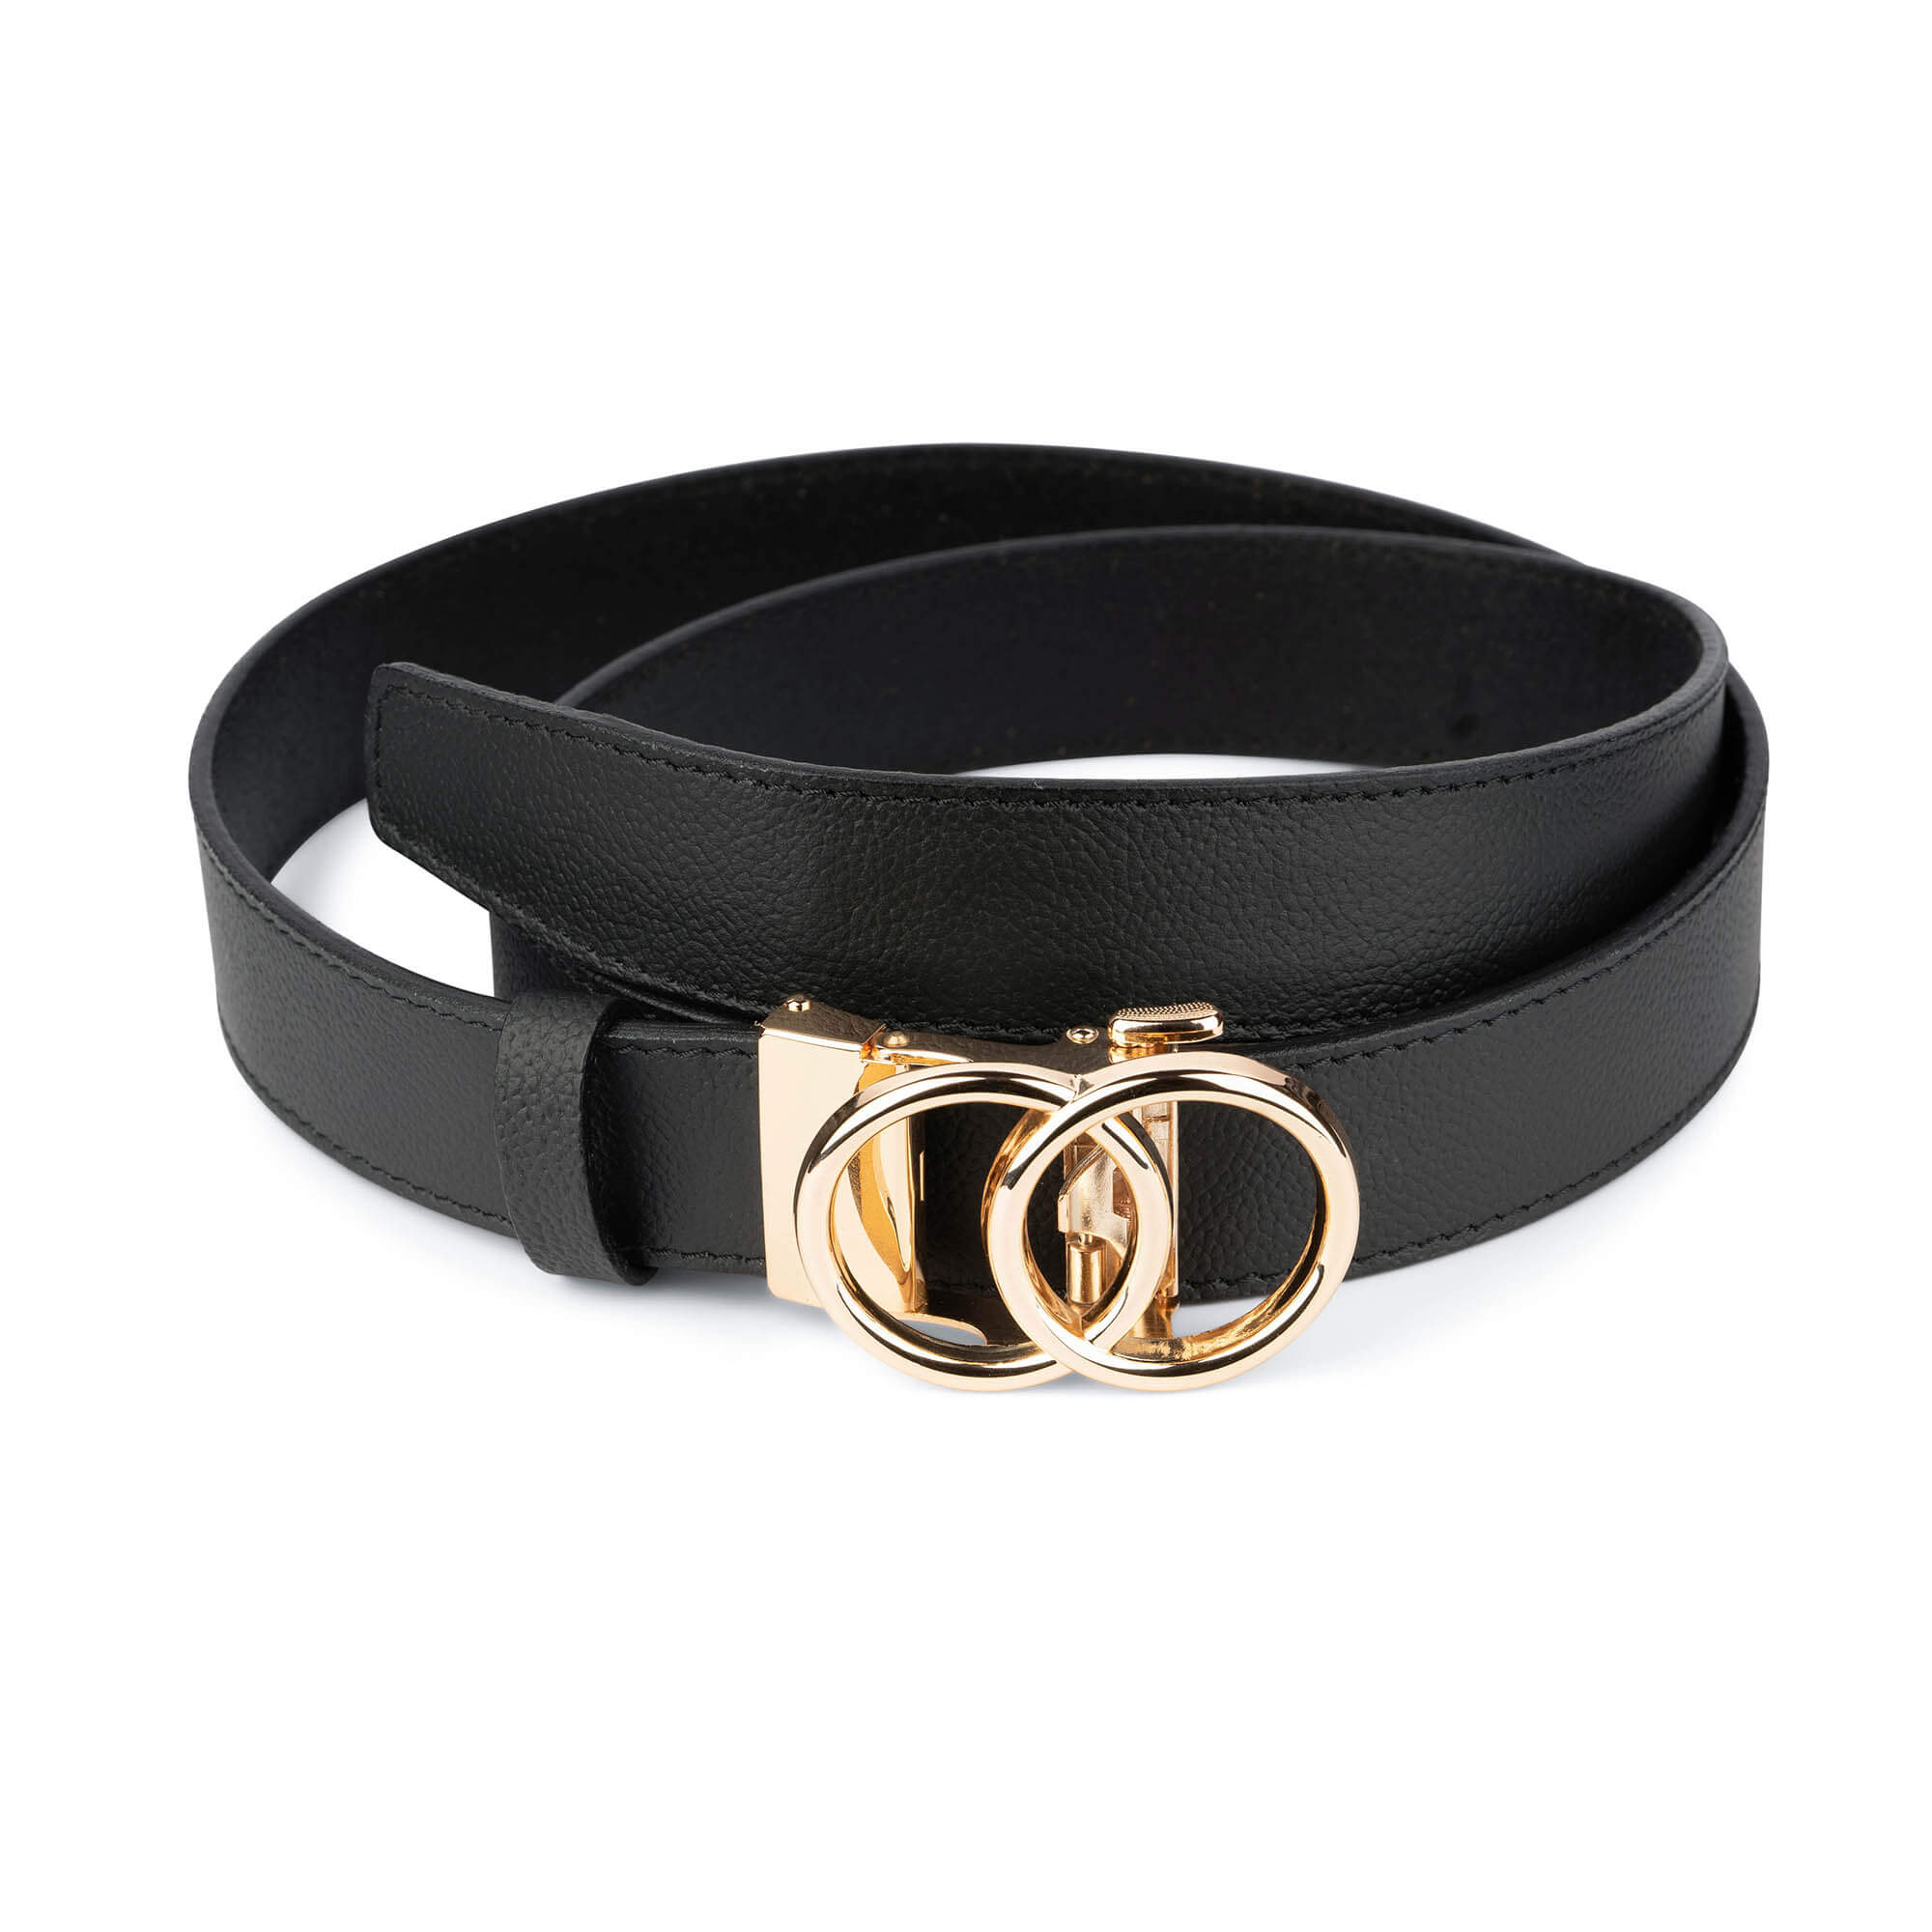 Buy Black Ratchet Belt With Gold Buckle | Double Circle | LeatherBelts